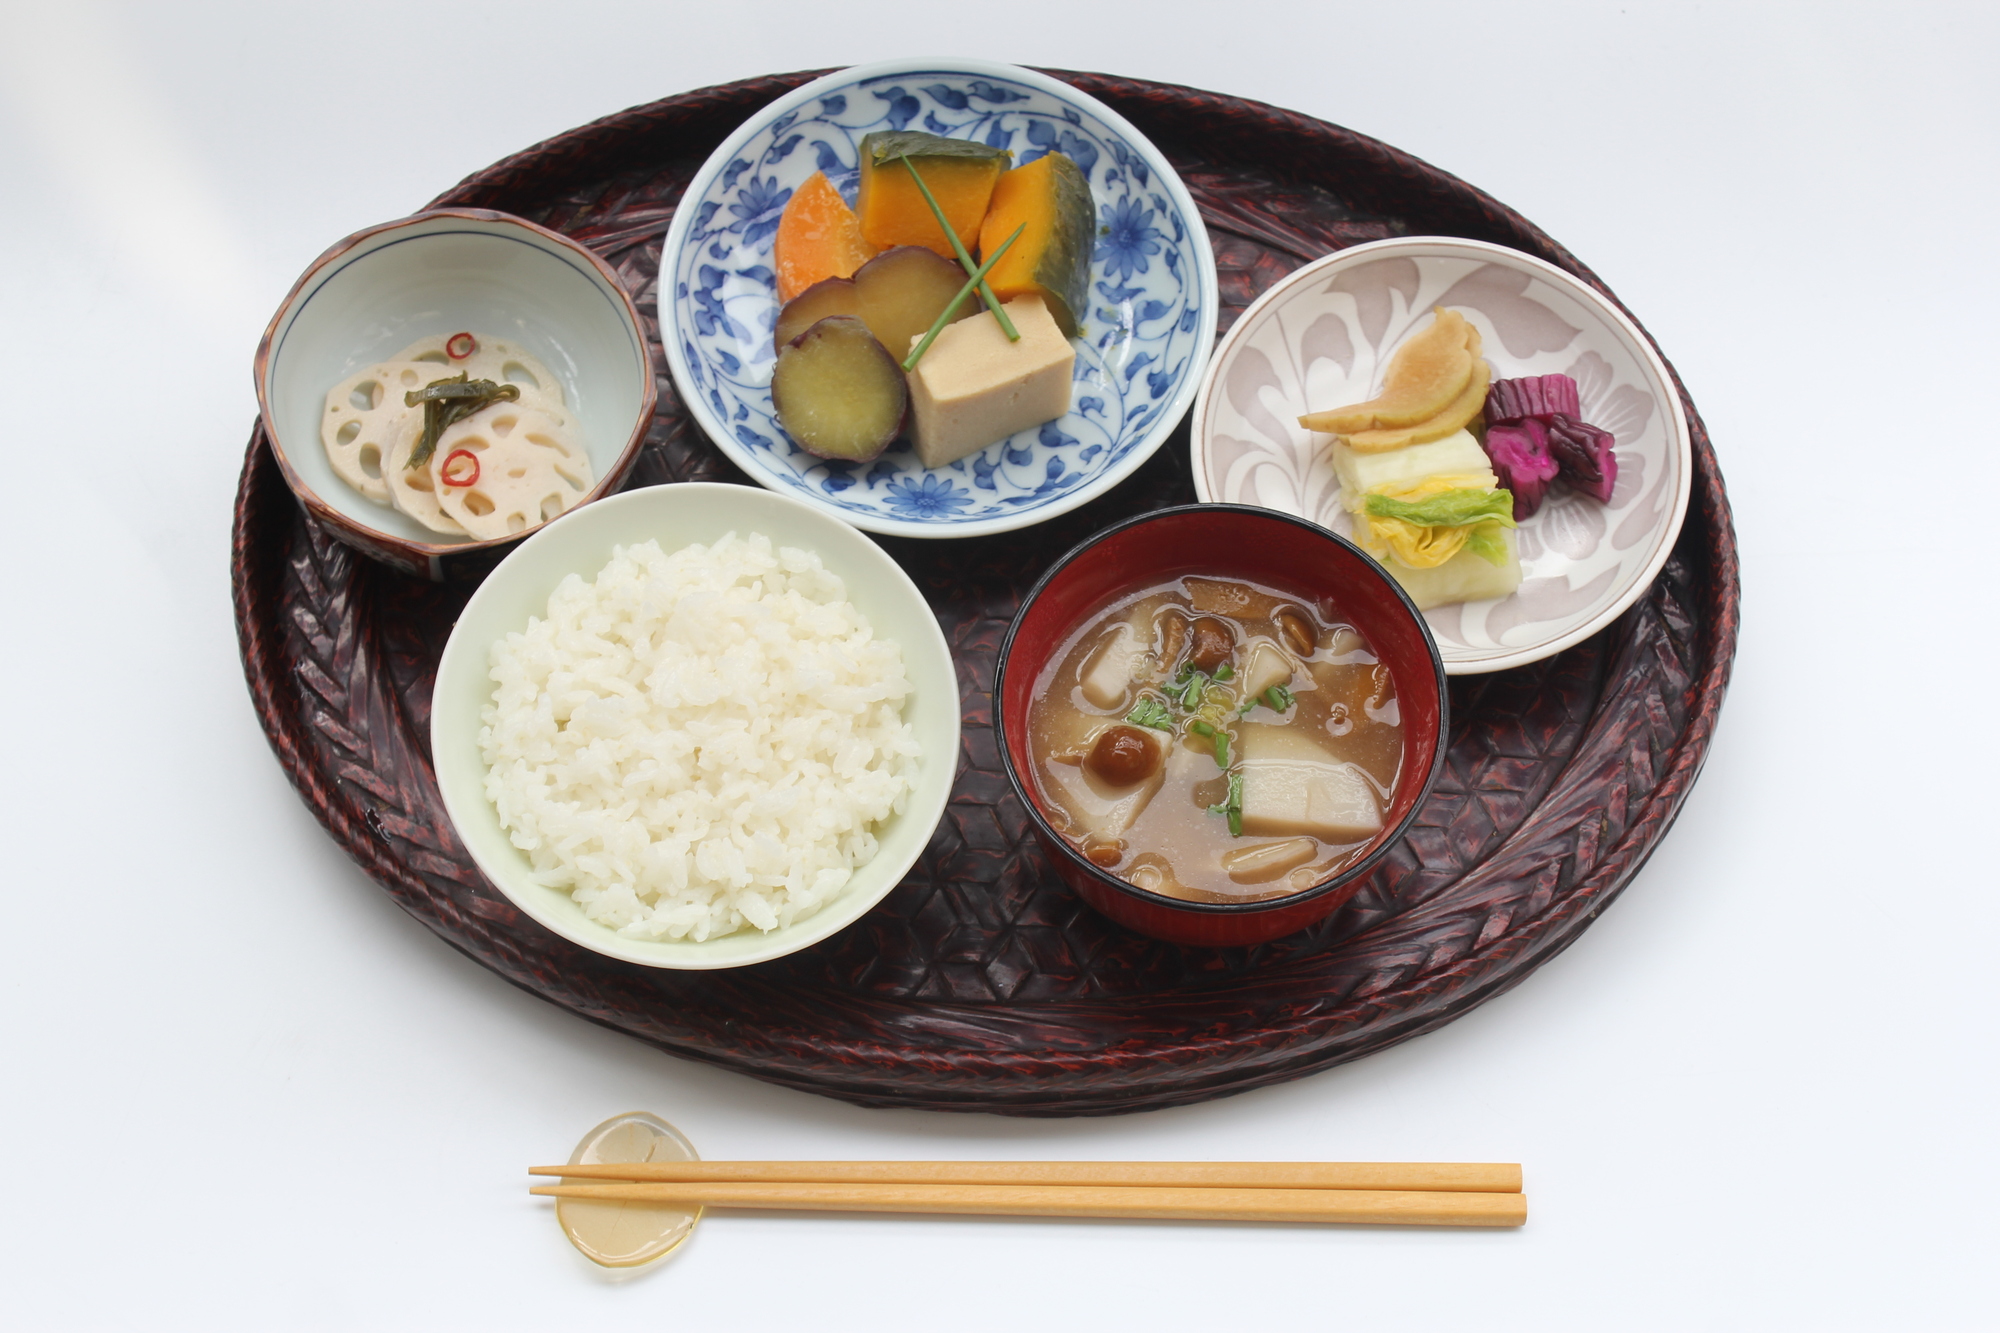 Daily Japanese Diet and The Concept of “One Soup and Three Dishes”